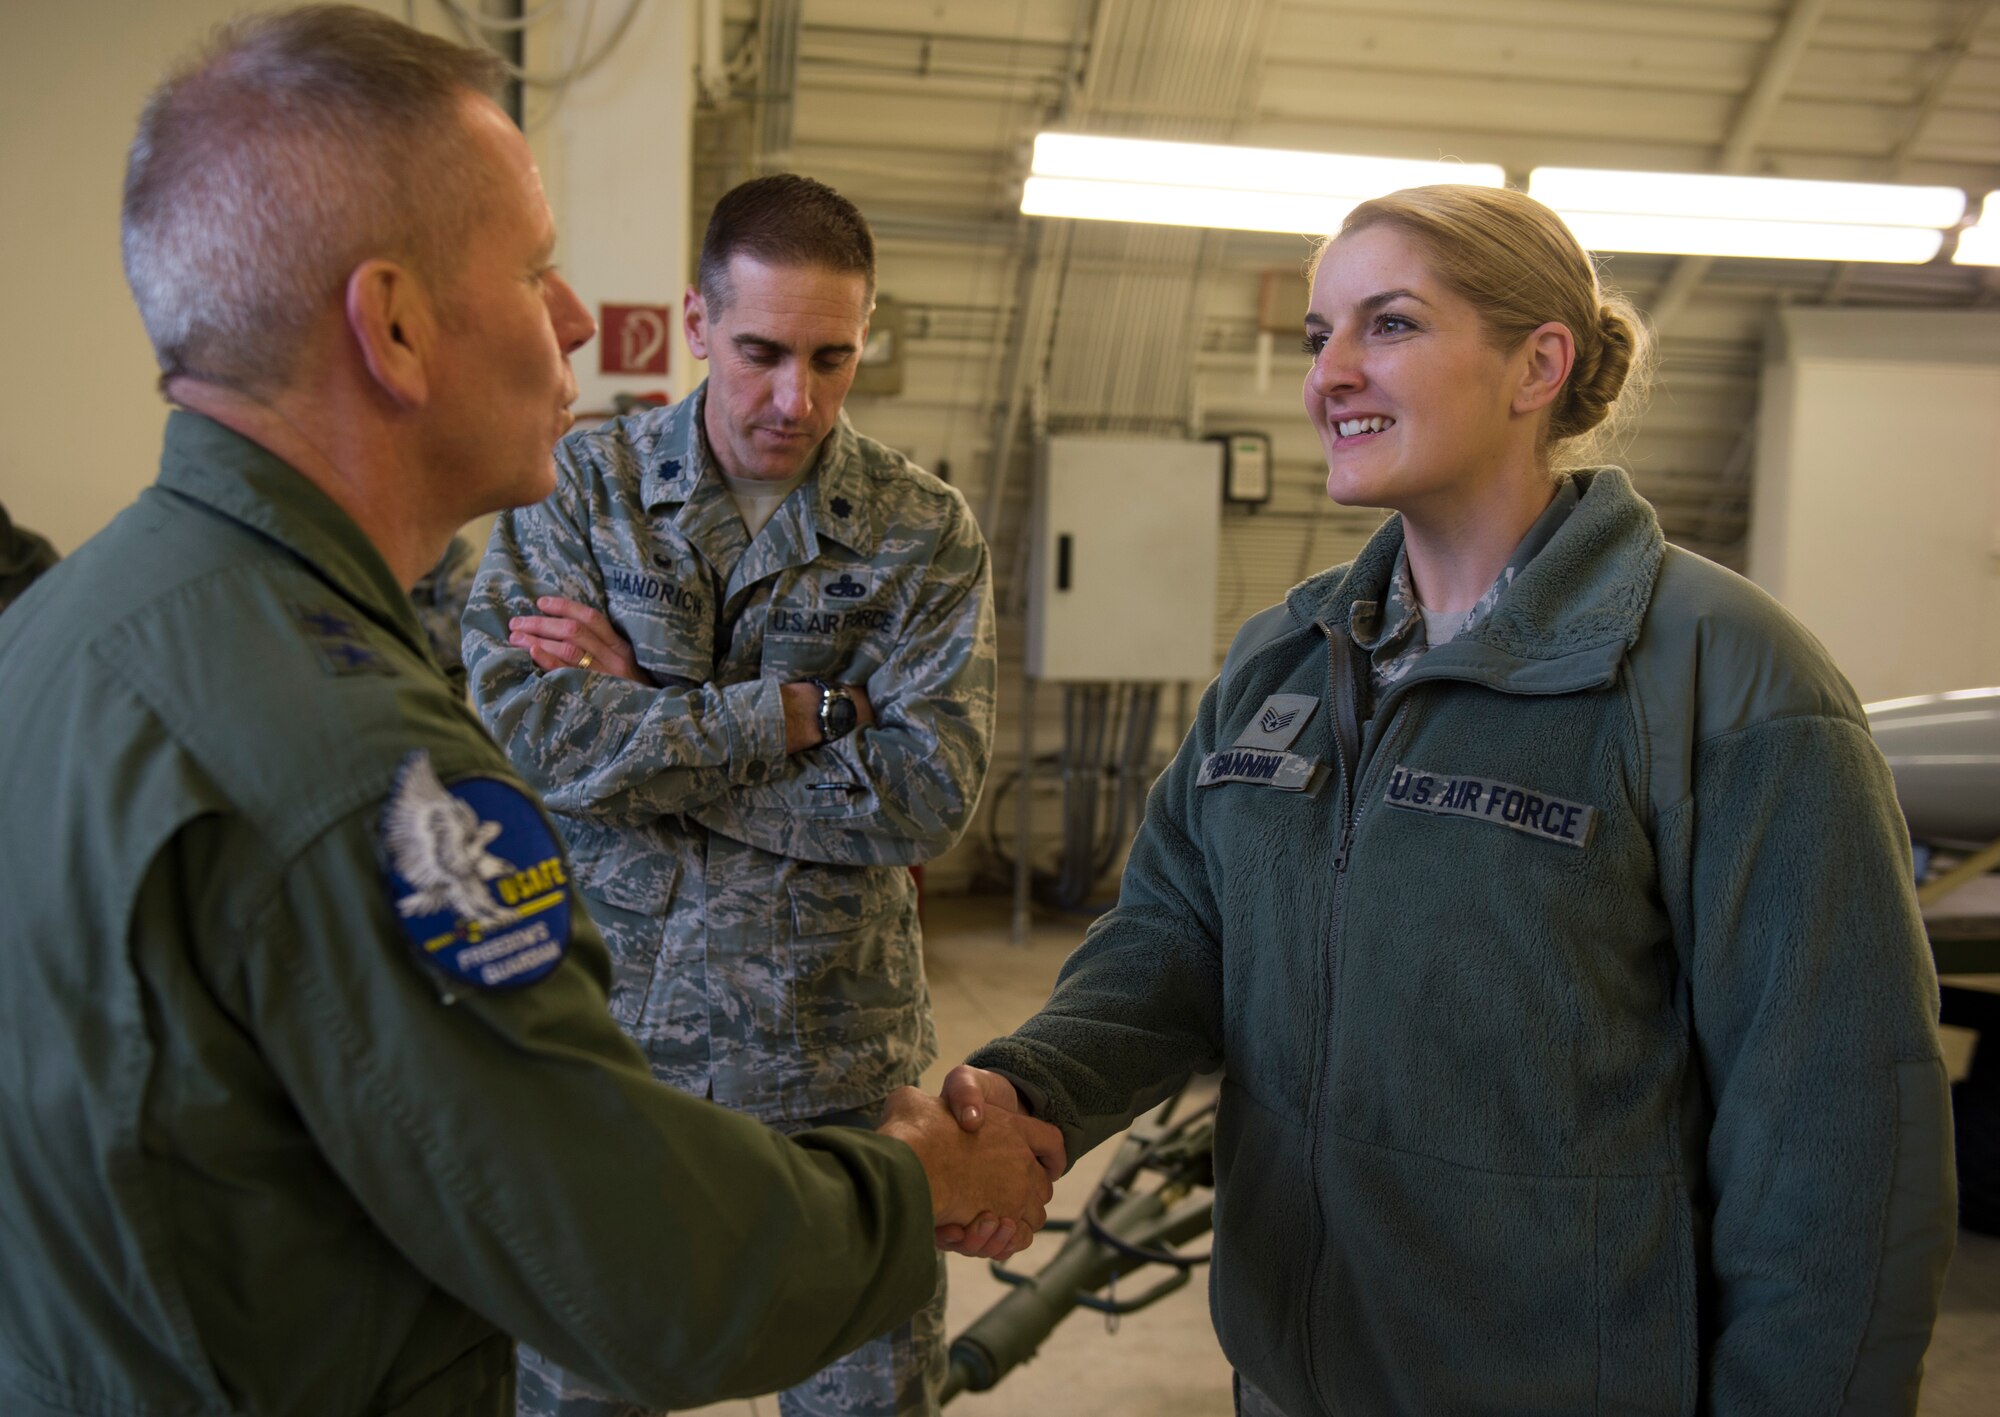 U.S. Air Force Maj. Gen. John McMullen, U.S. Air Forces in Europe and Air Forces Africa Strategic Deterrence Integration director of operations, presents a coin to U.S. Air Force Master Sgt. Randee Giannini, a 702nd Munitions Support Squadron  NCO in charge accountability and reporting, during a tour of 702nd MUNSS at Buechel Air Base, Germany, Nov. 10, 2015. The 702nd MUNSS is divided into five flights consisting of the maintenance, operations, communications, custody and force support. The squadron directly supports NATO contingency and wartime operations and its strike mission. (U.S. Air Force photo by Staff Sgt. Christopher Ruano/Released)